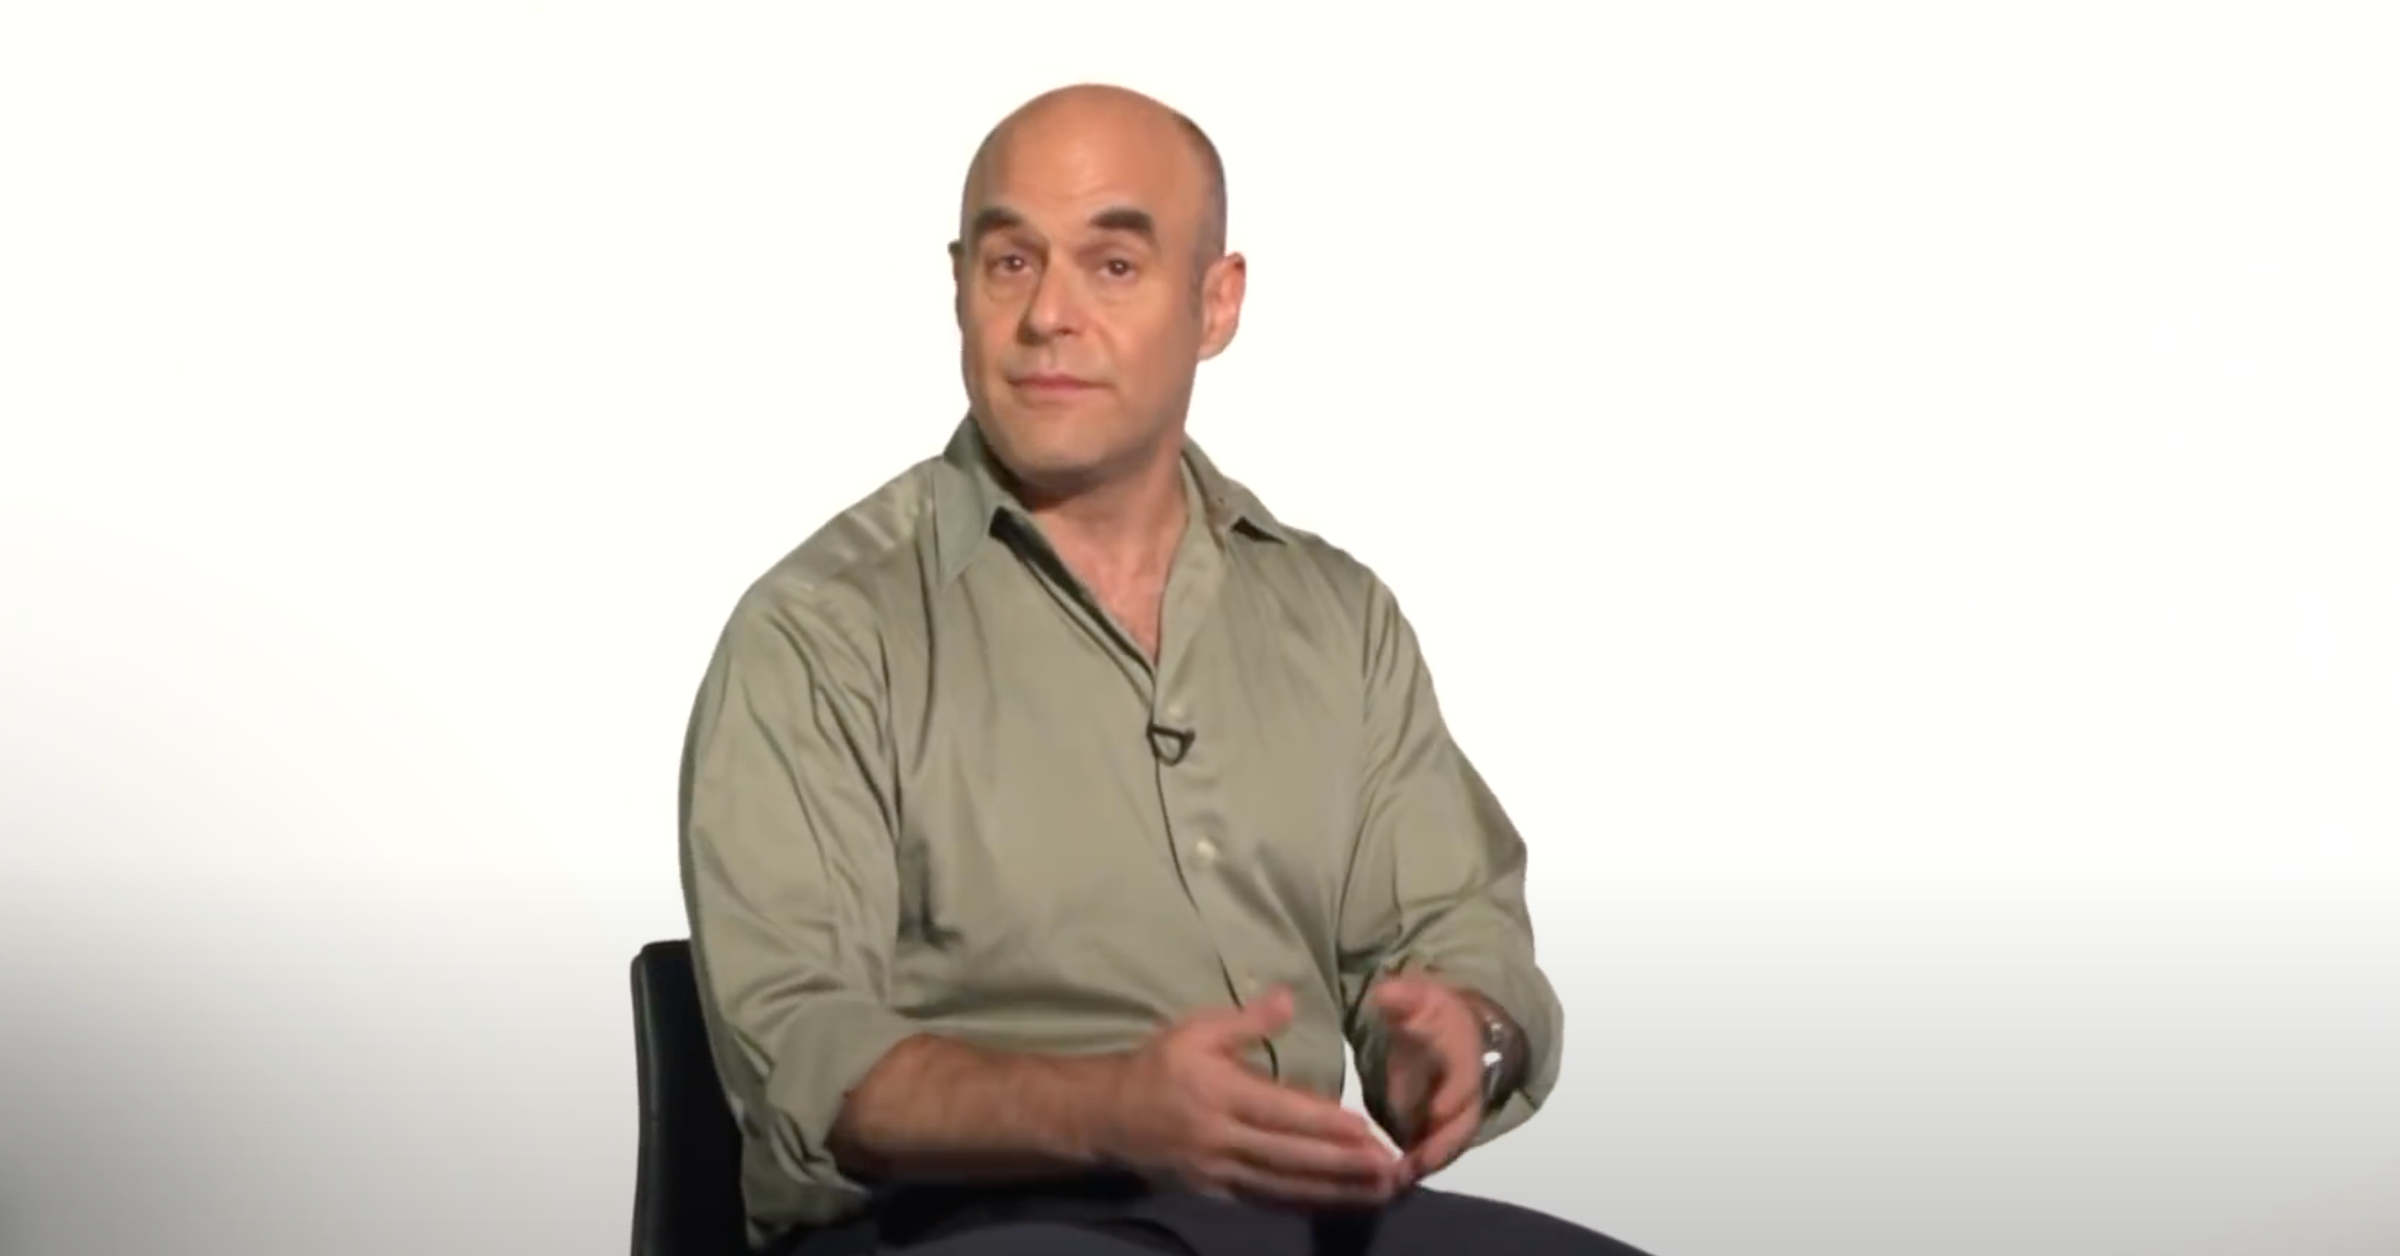 NPR'S Peter Sagal does an interview with PBS